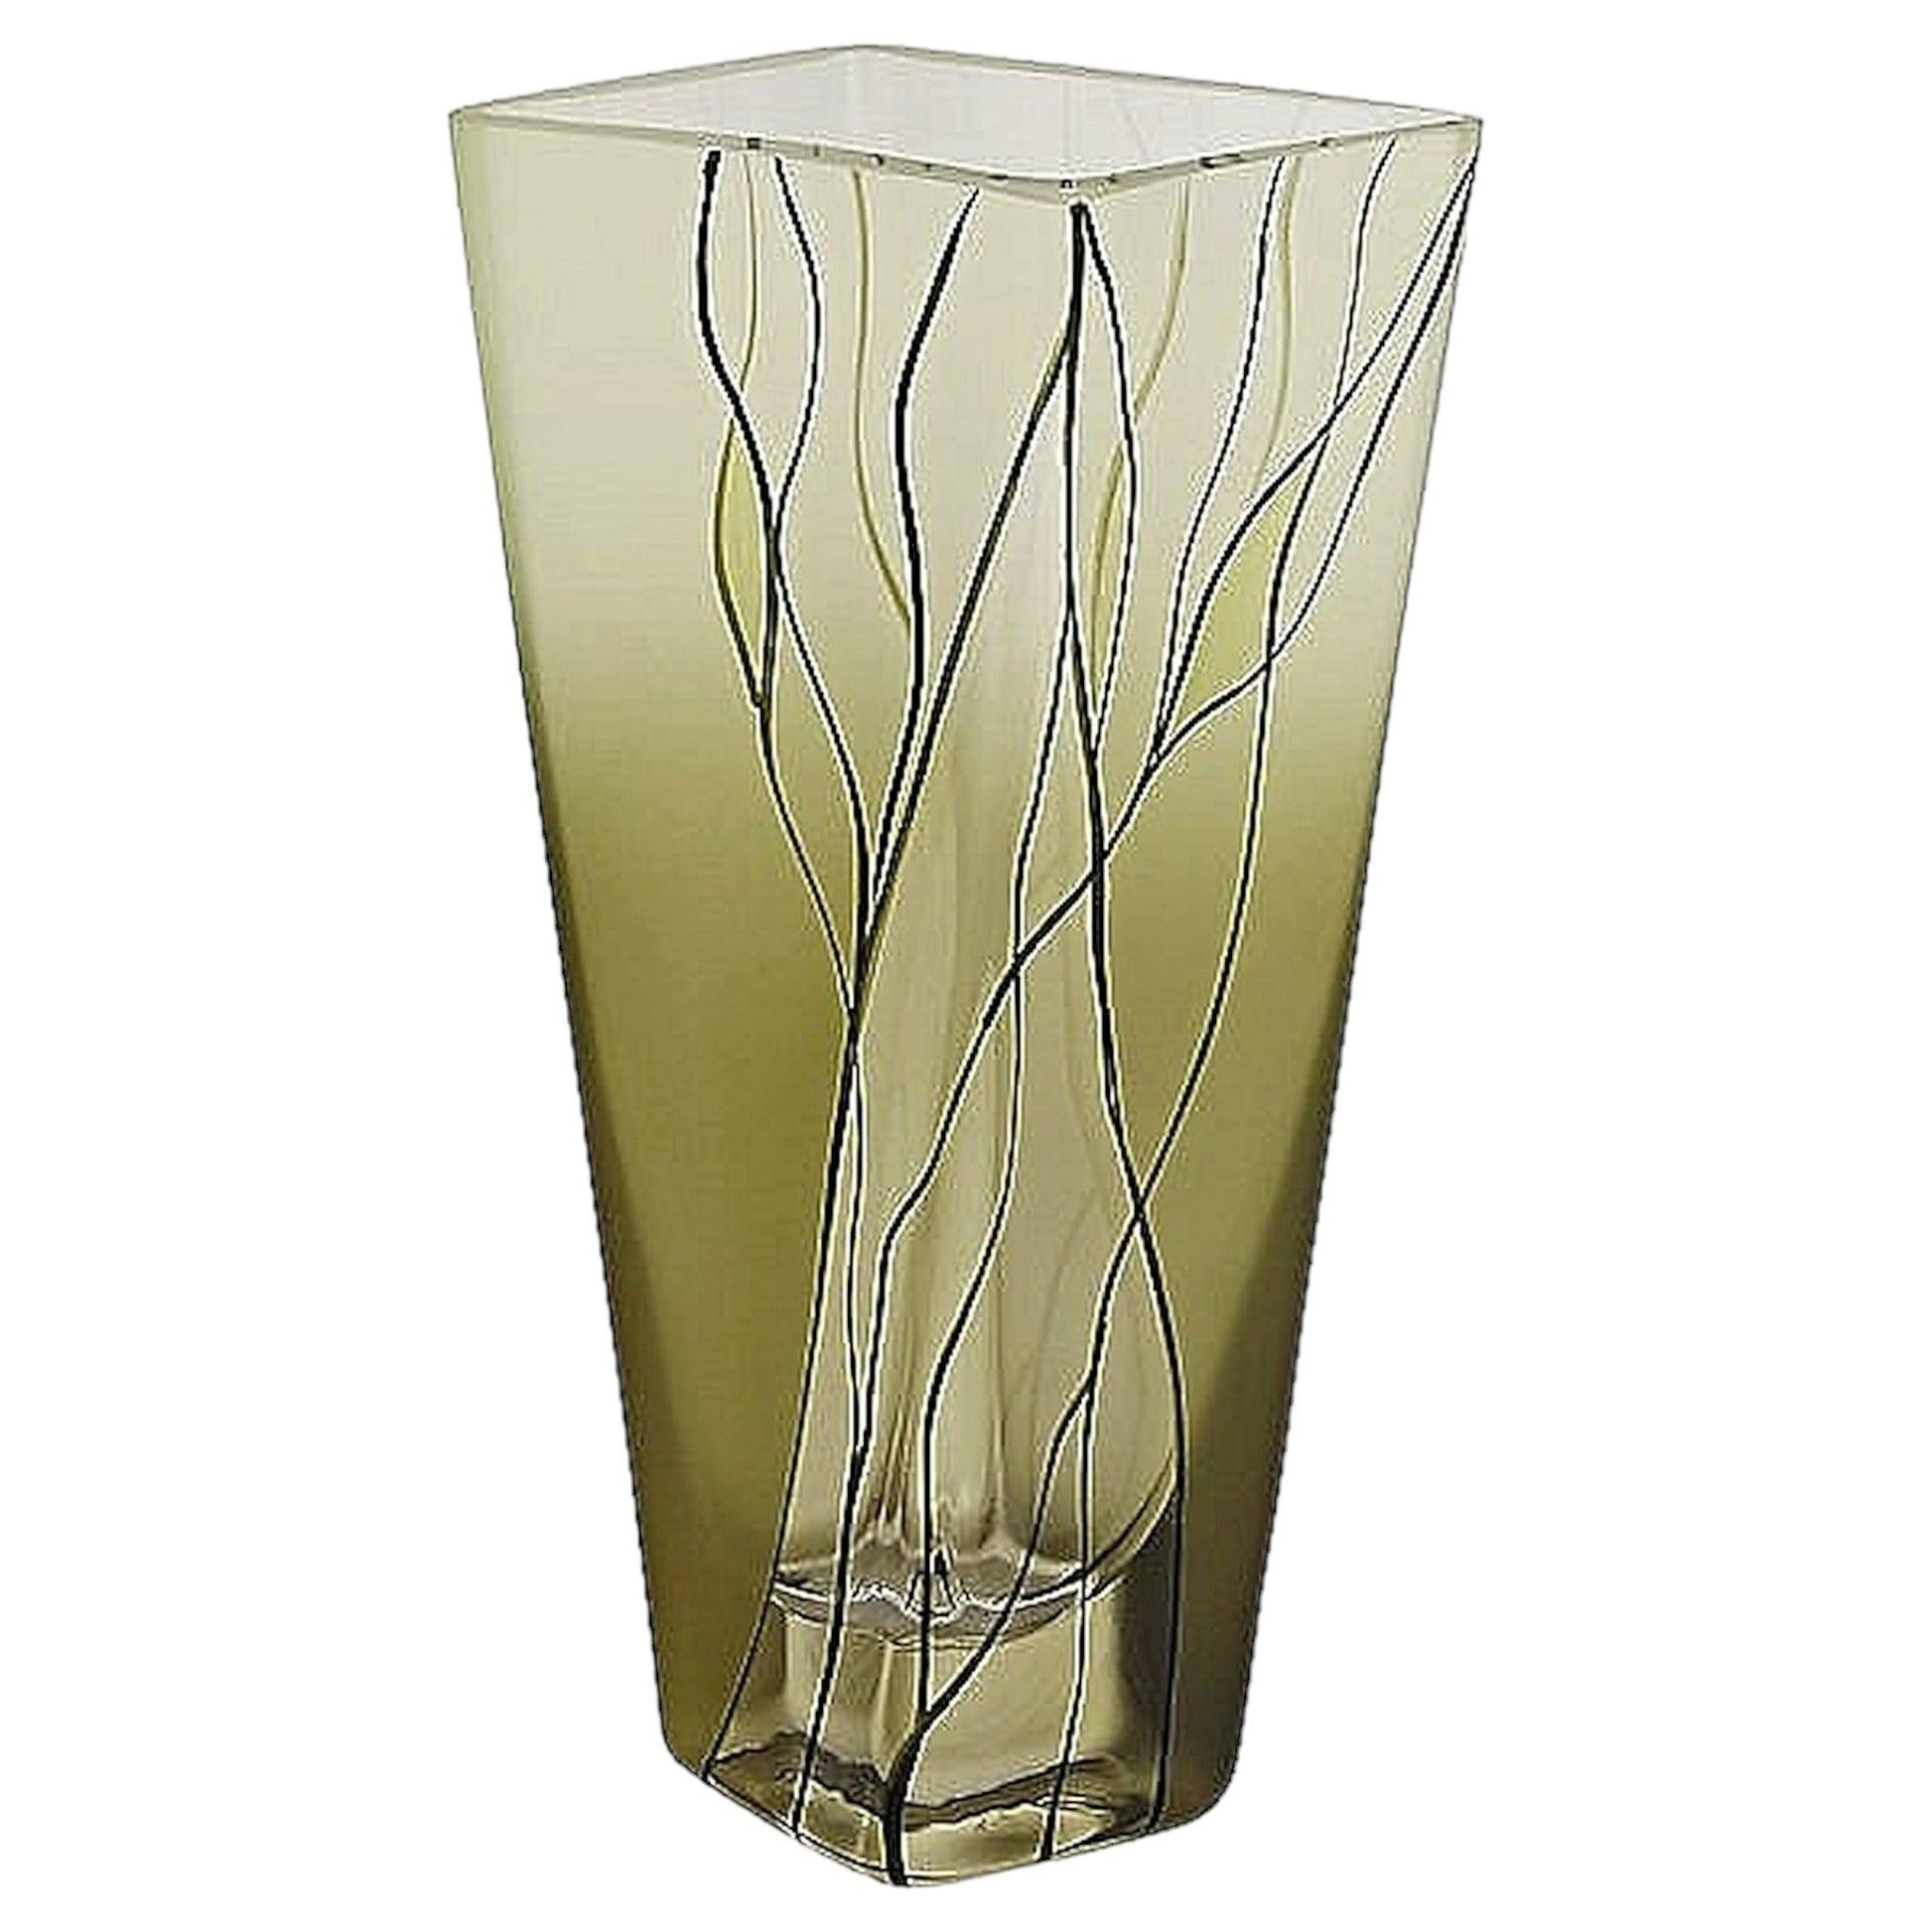 European Green Crystal 8-inch Square Vase - Nature Home Decor